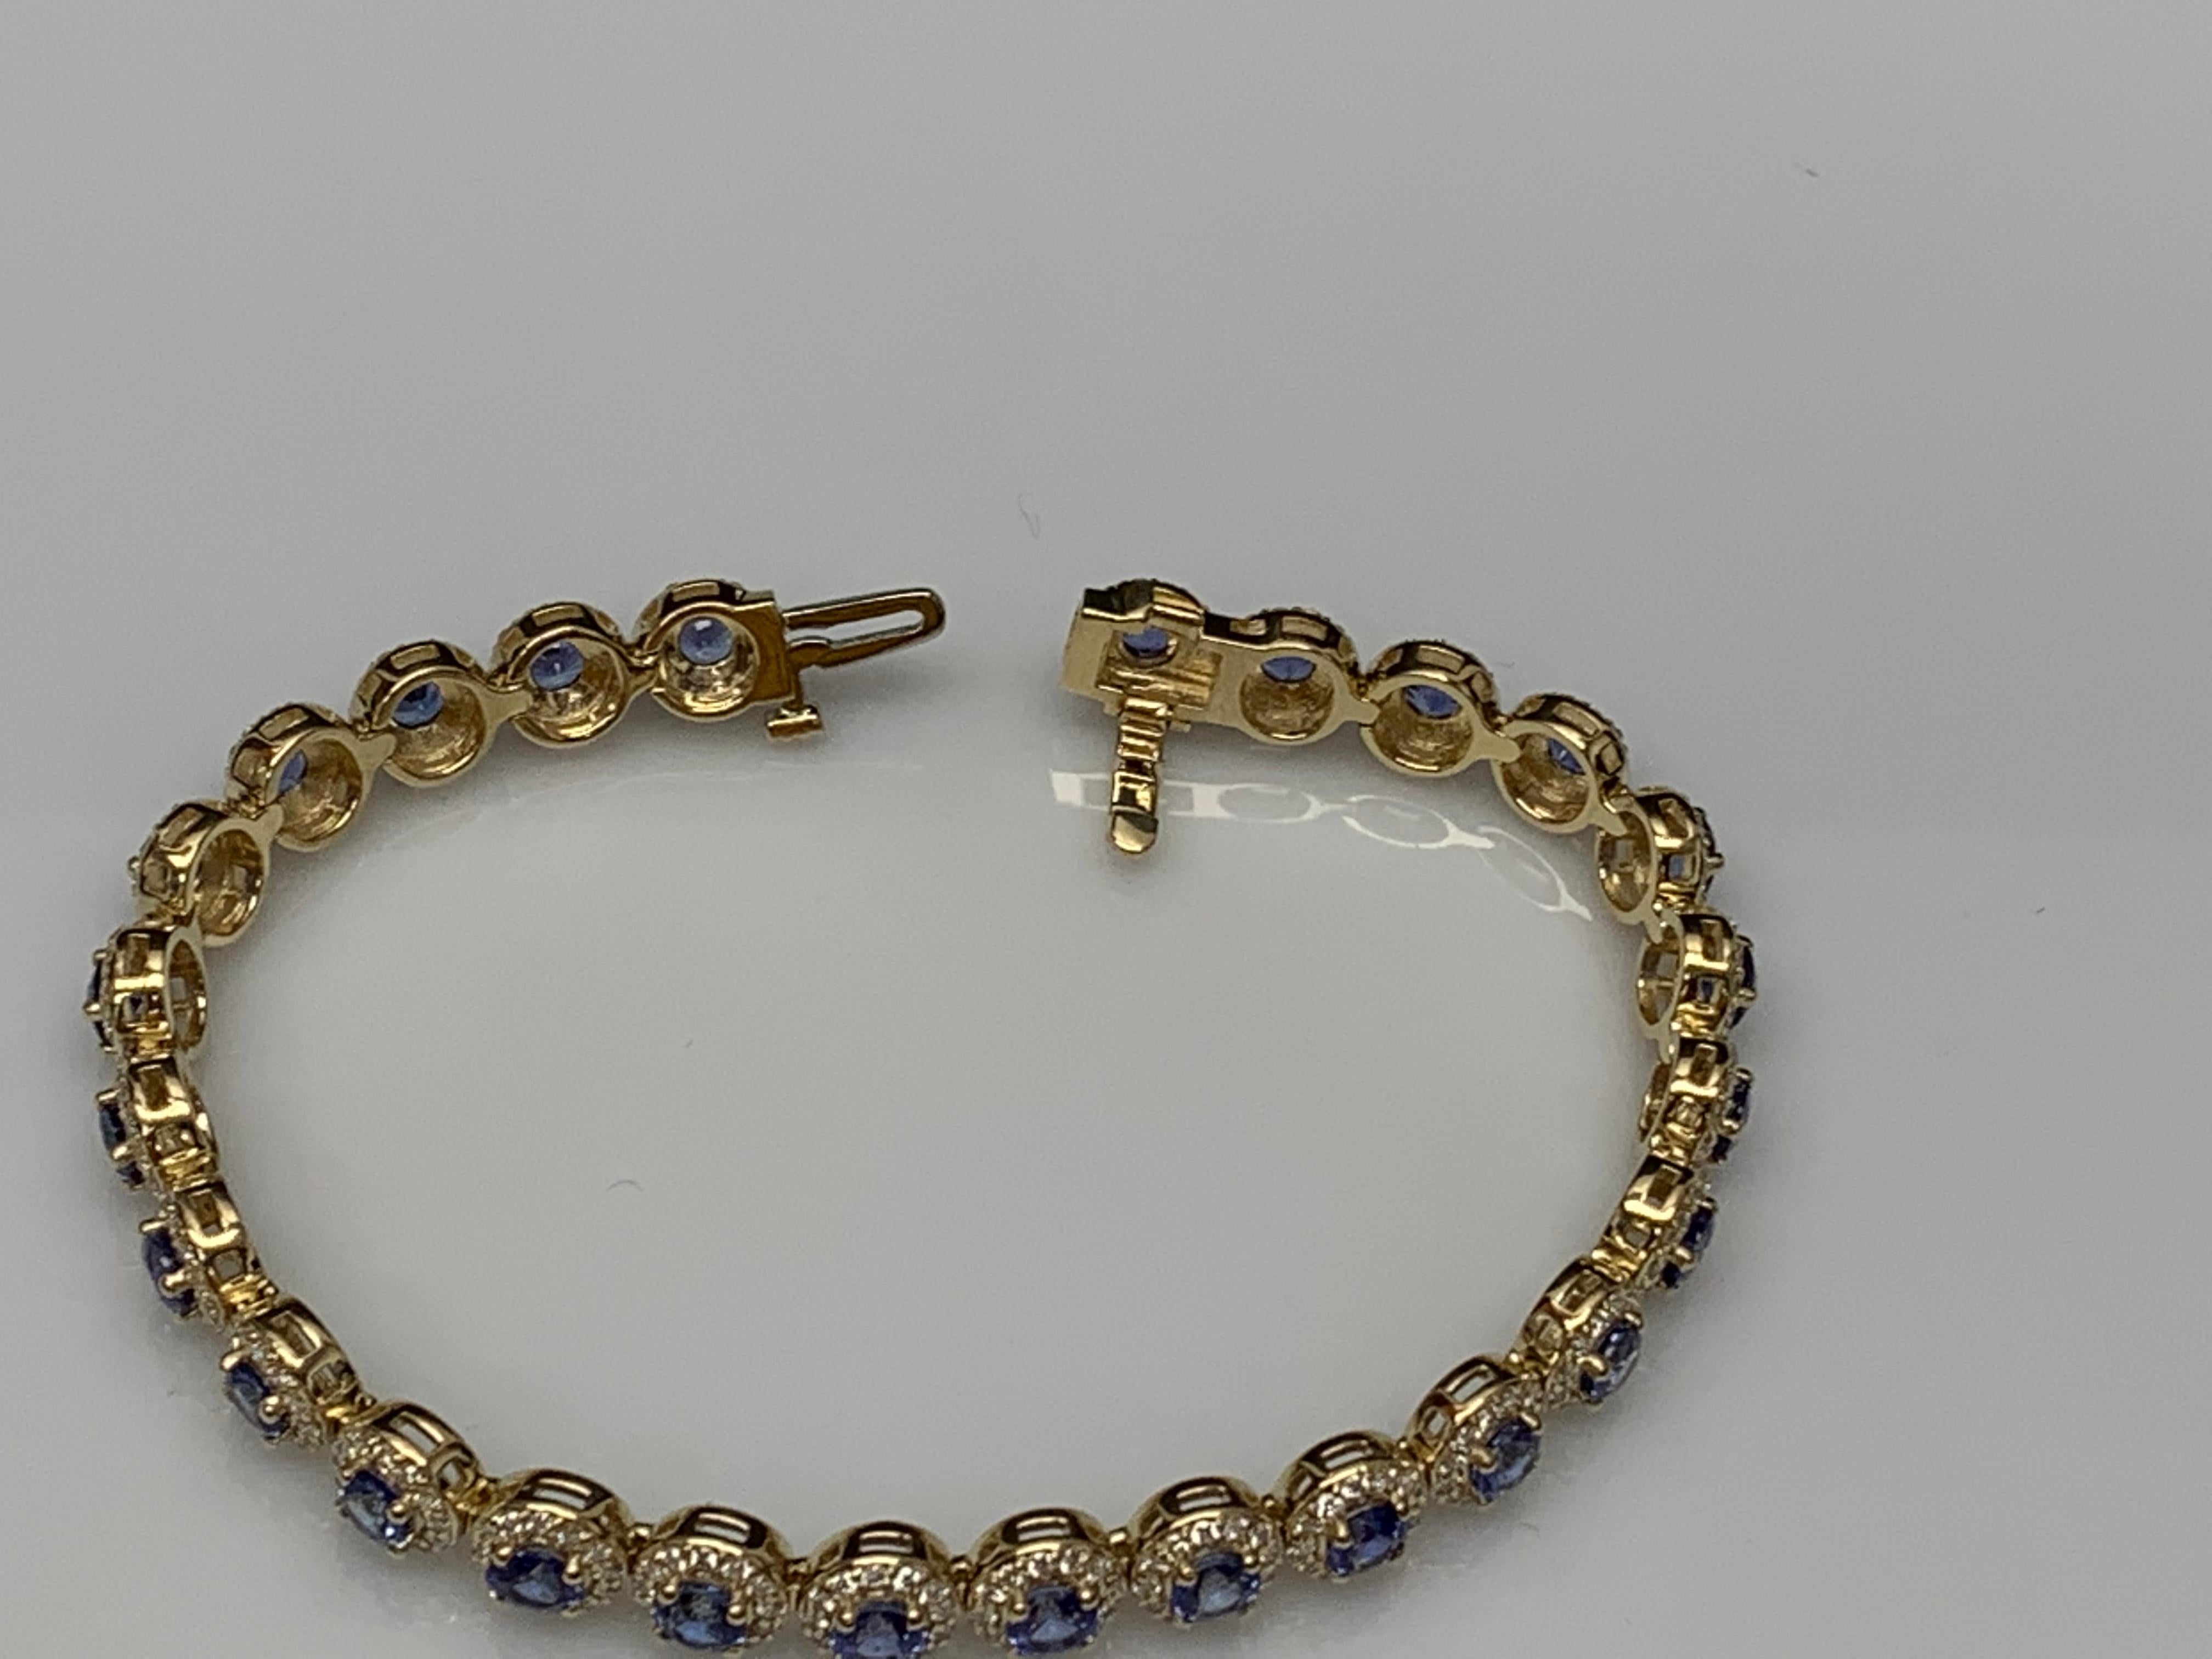 7.47 Carat Blue Sapphire and Diamond Halo Tennis Bracelet in 14k Yellow Gold For Sale 9